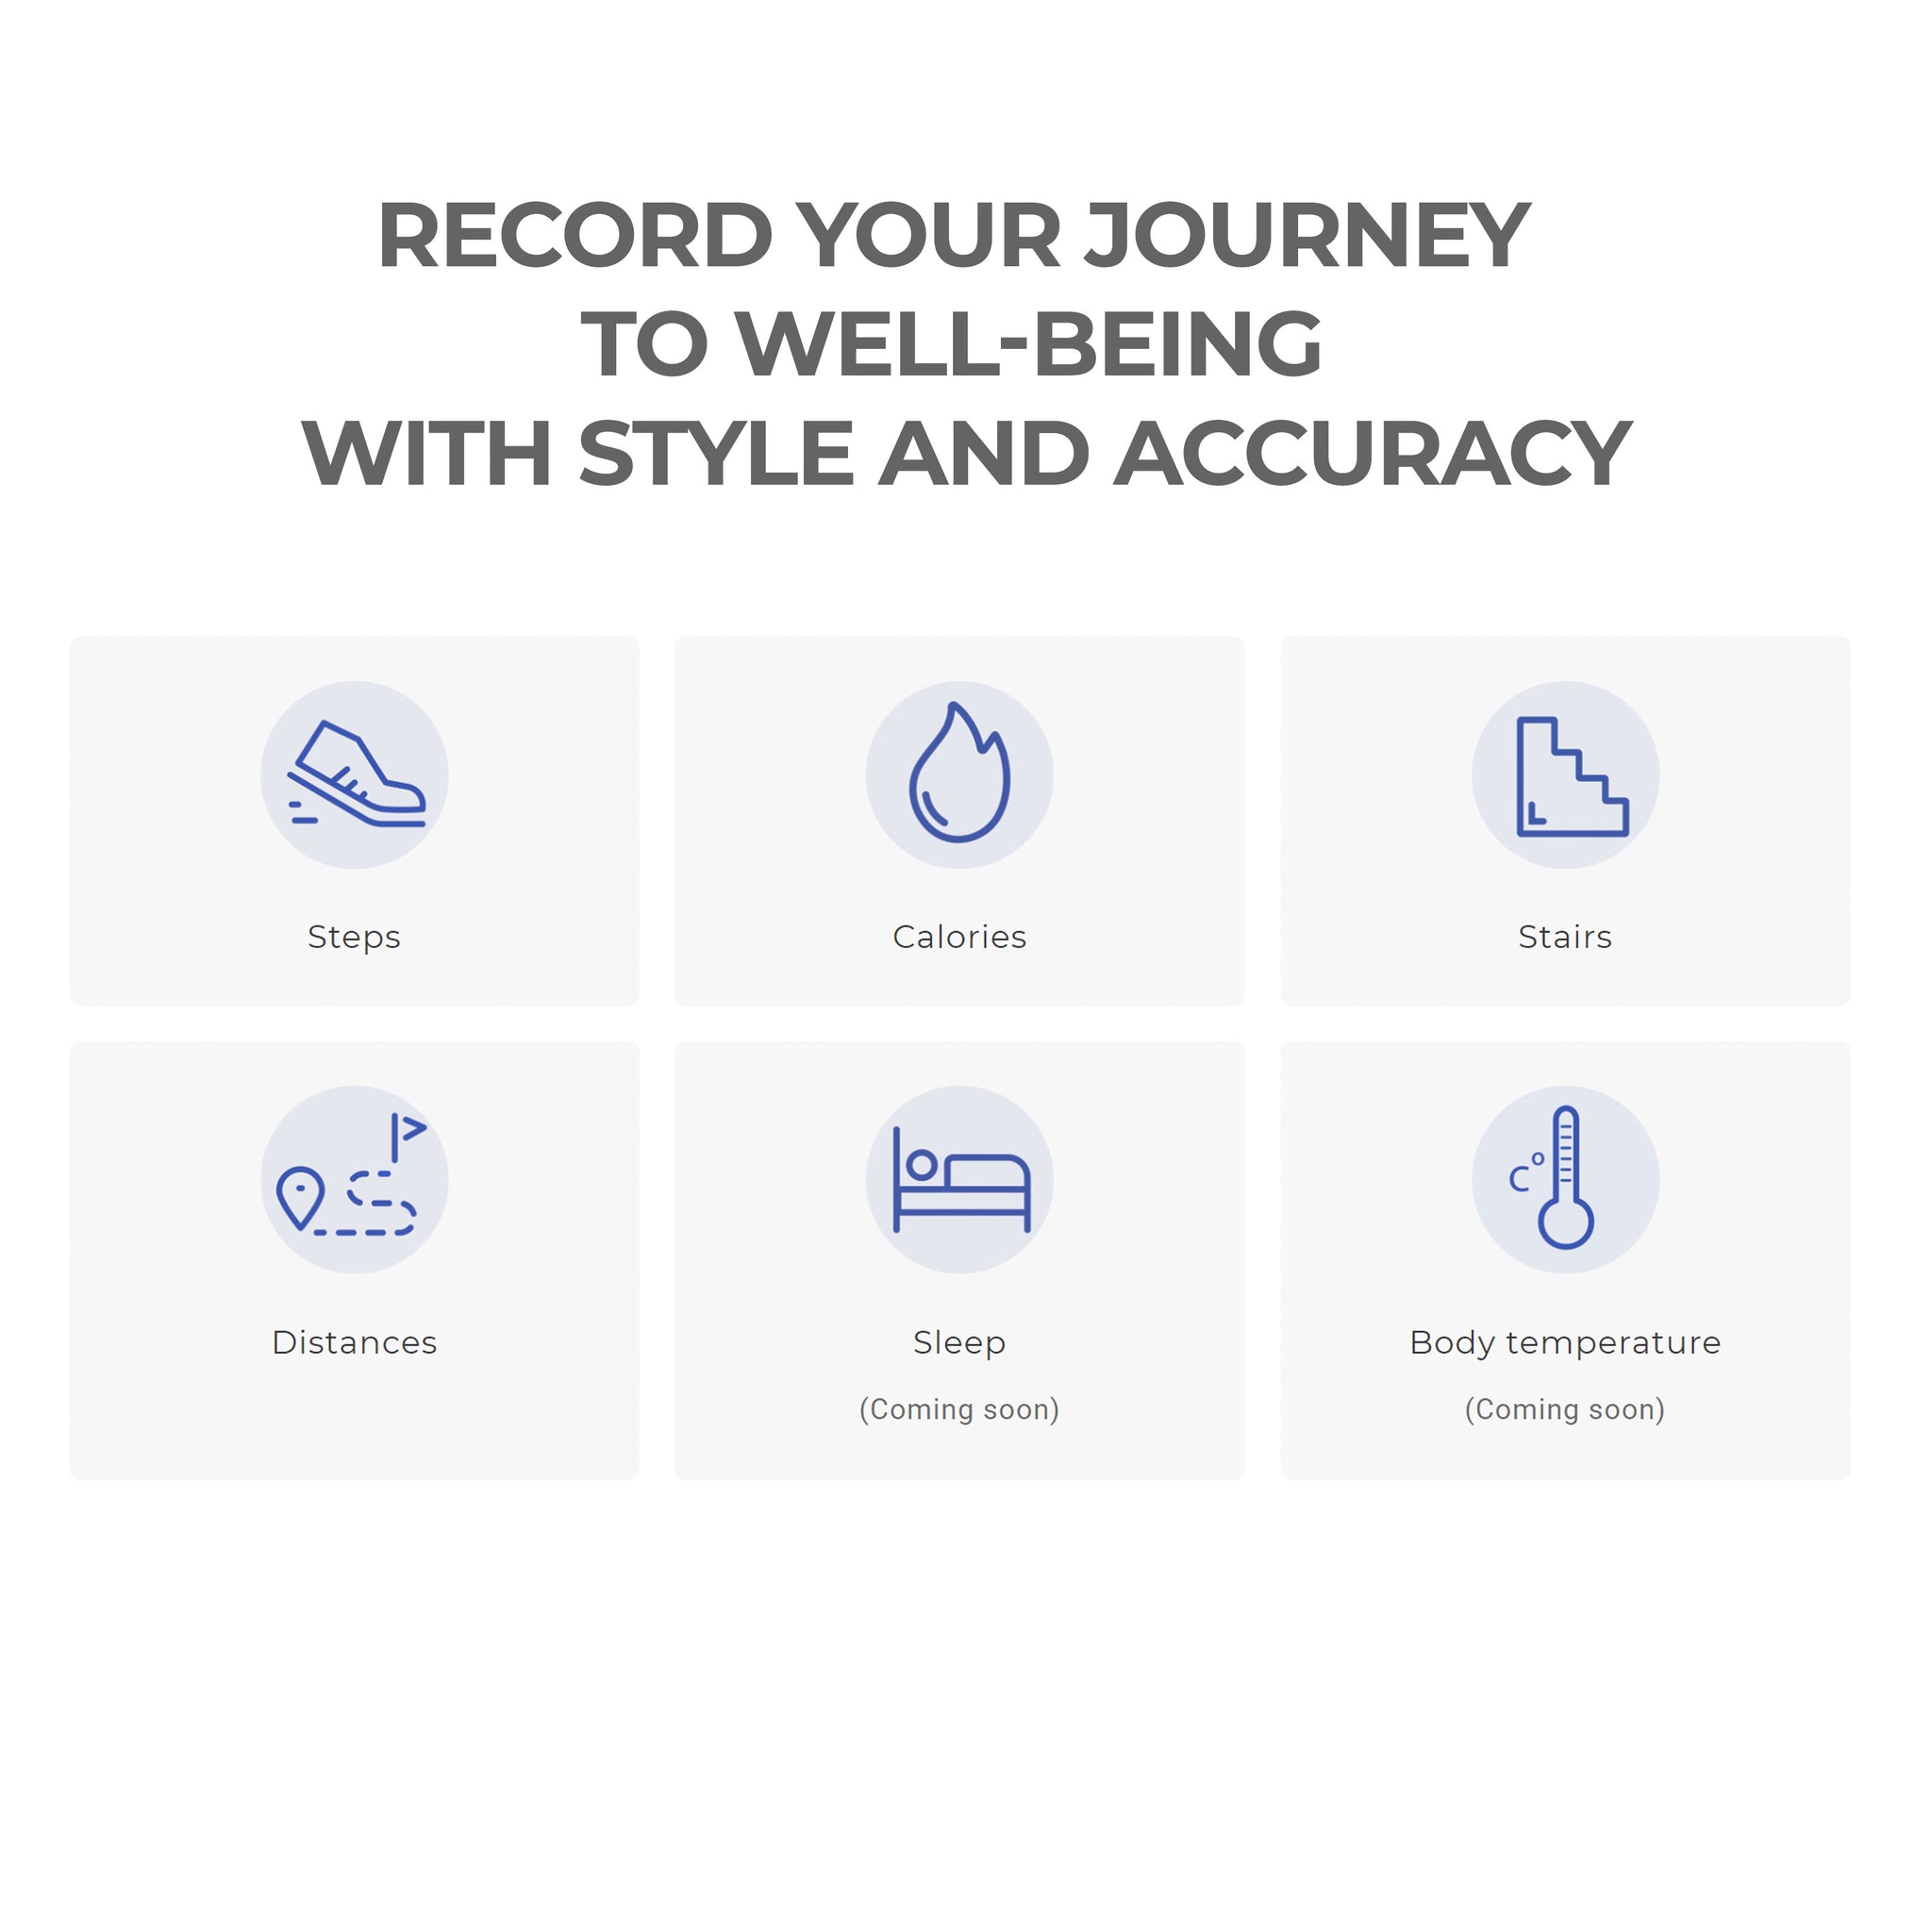 Record your journey to well-being with Gema